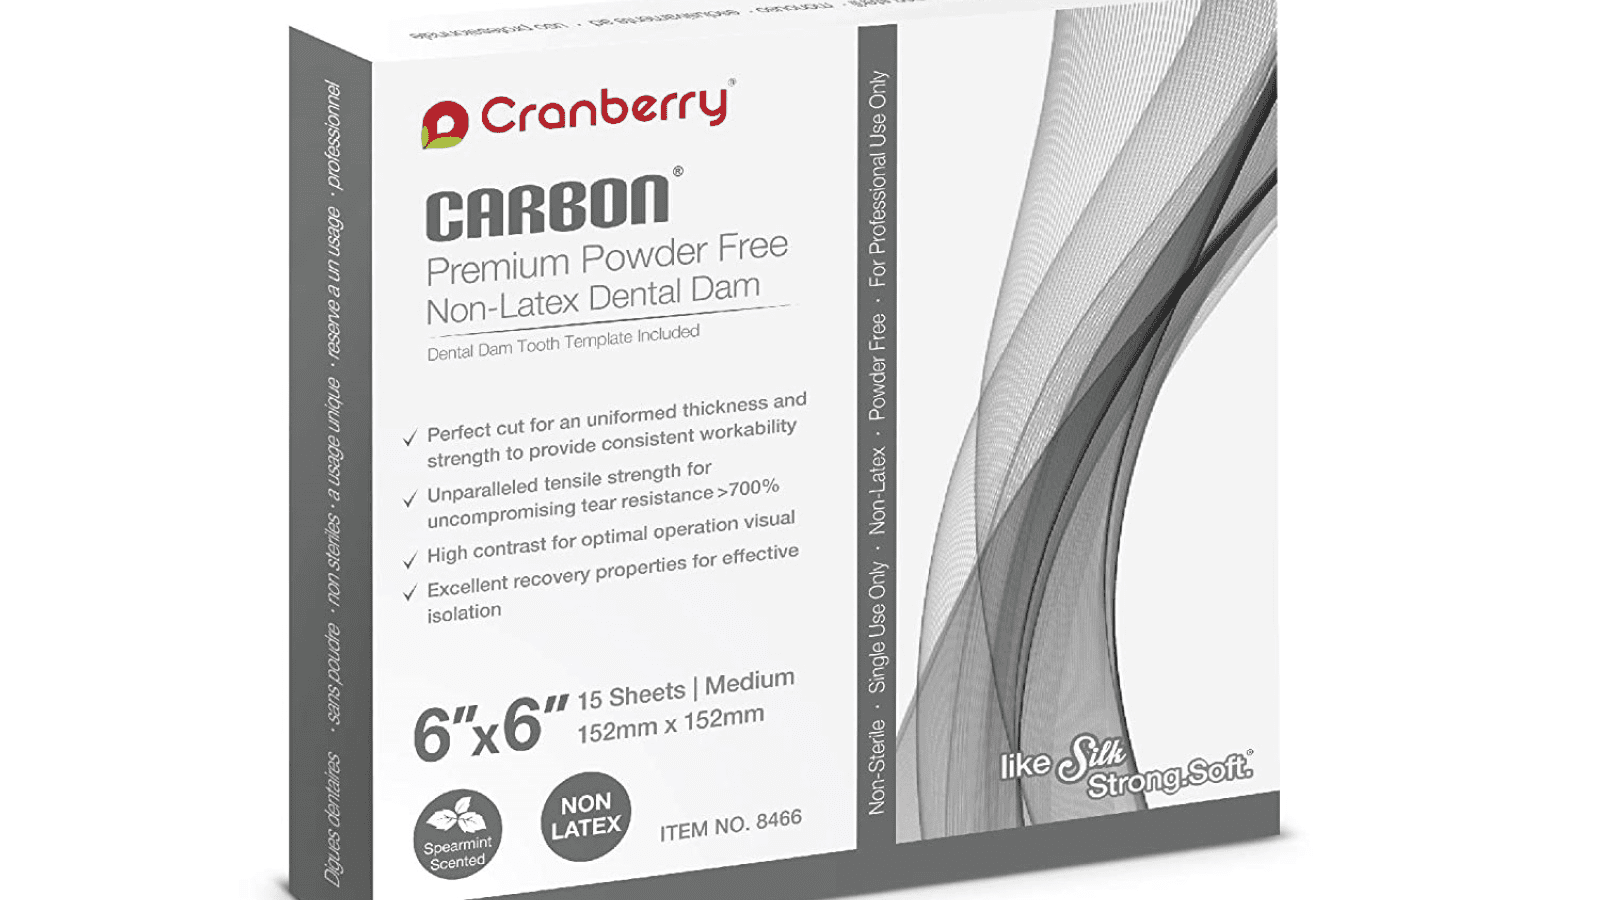 Carbon latex dental dam by cranberry